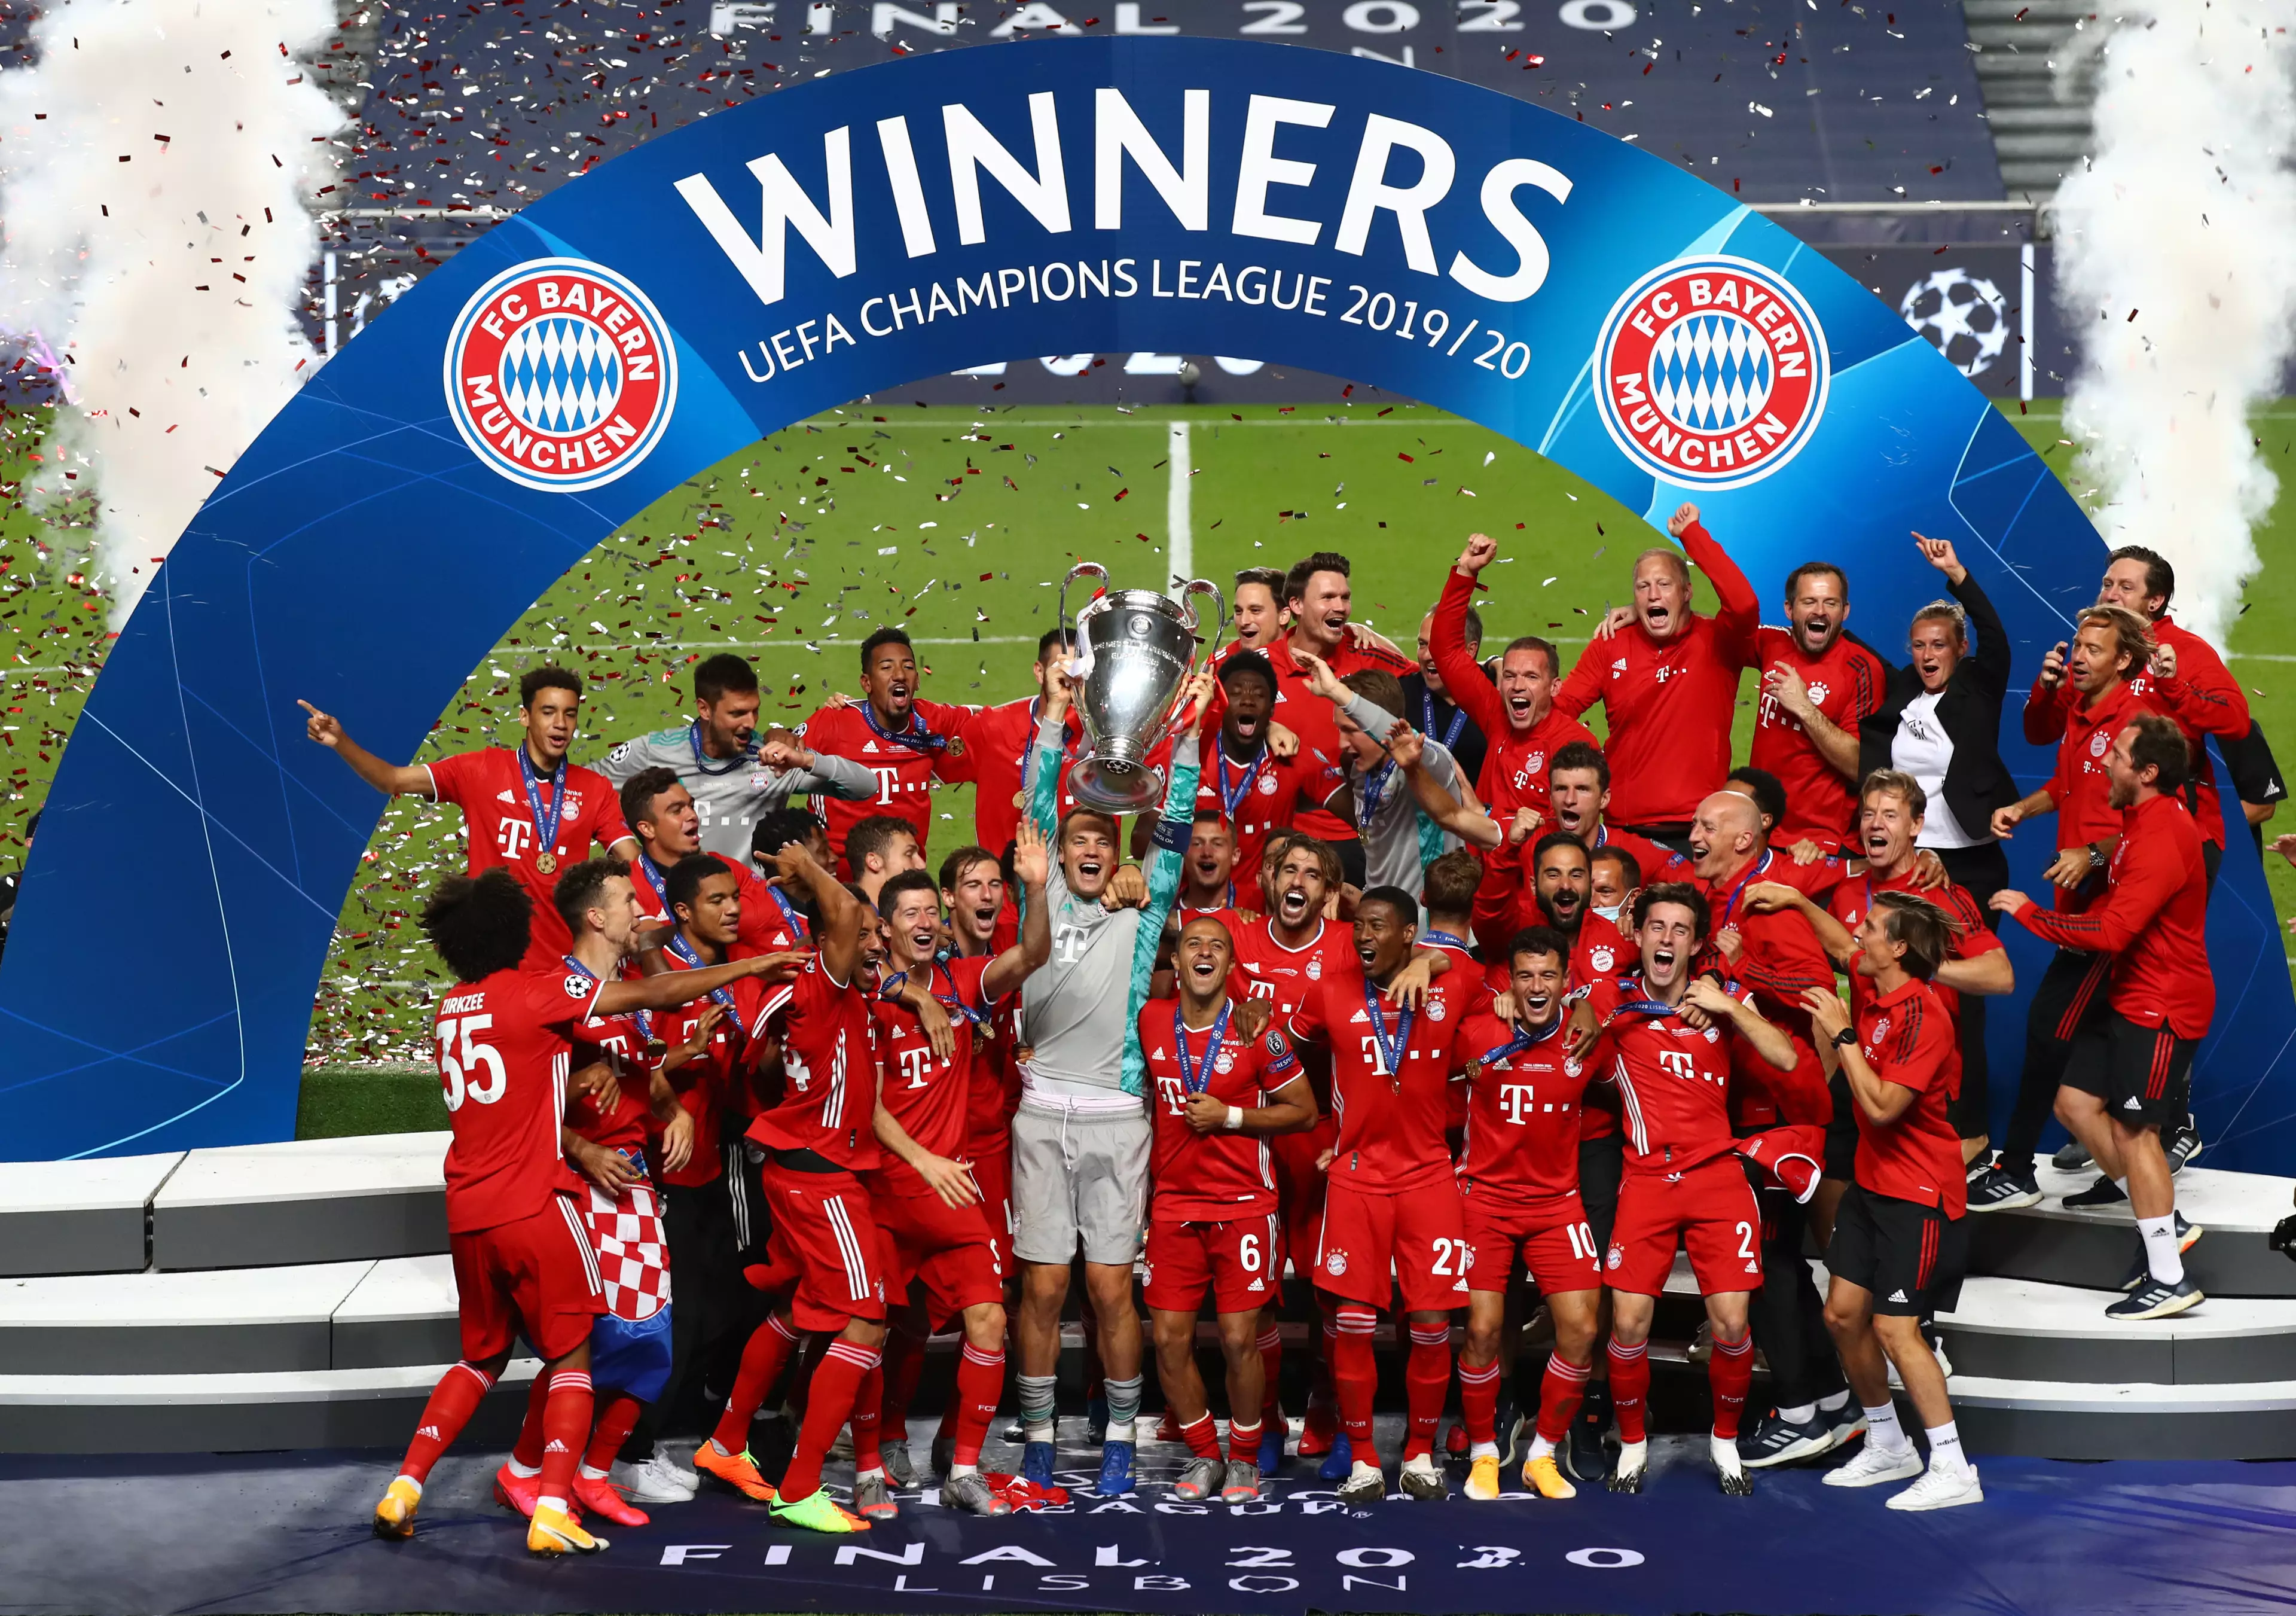 Bayern's Champions League win will feature in the documentary. Image: PA Images